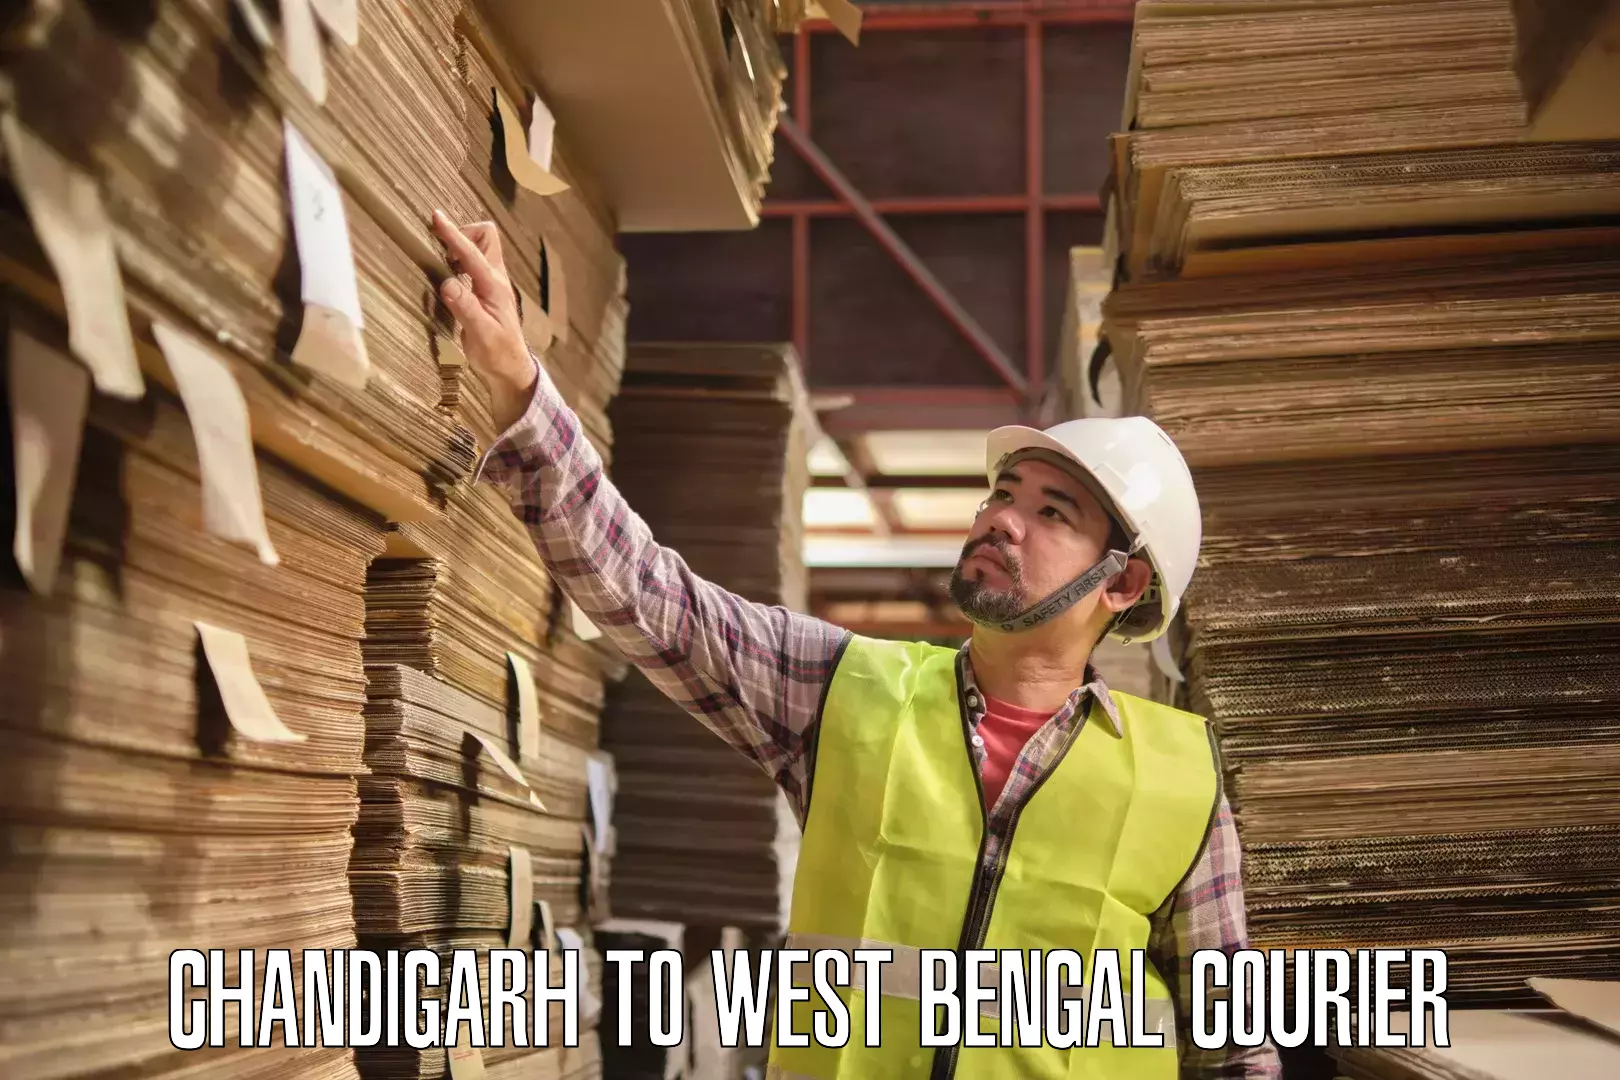 Courier service comparison in Chandigarh to West Bengal